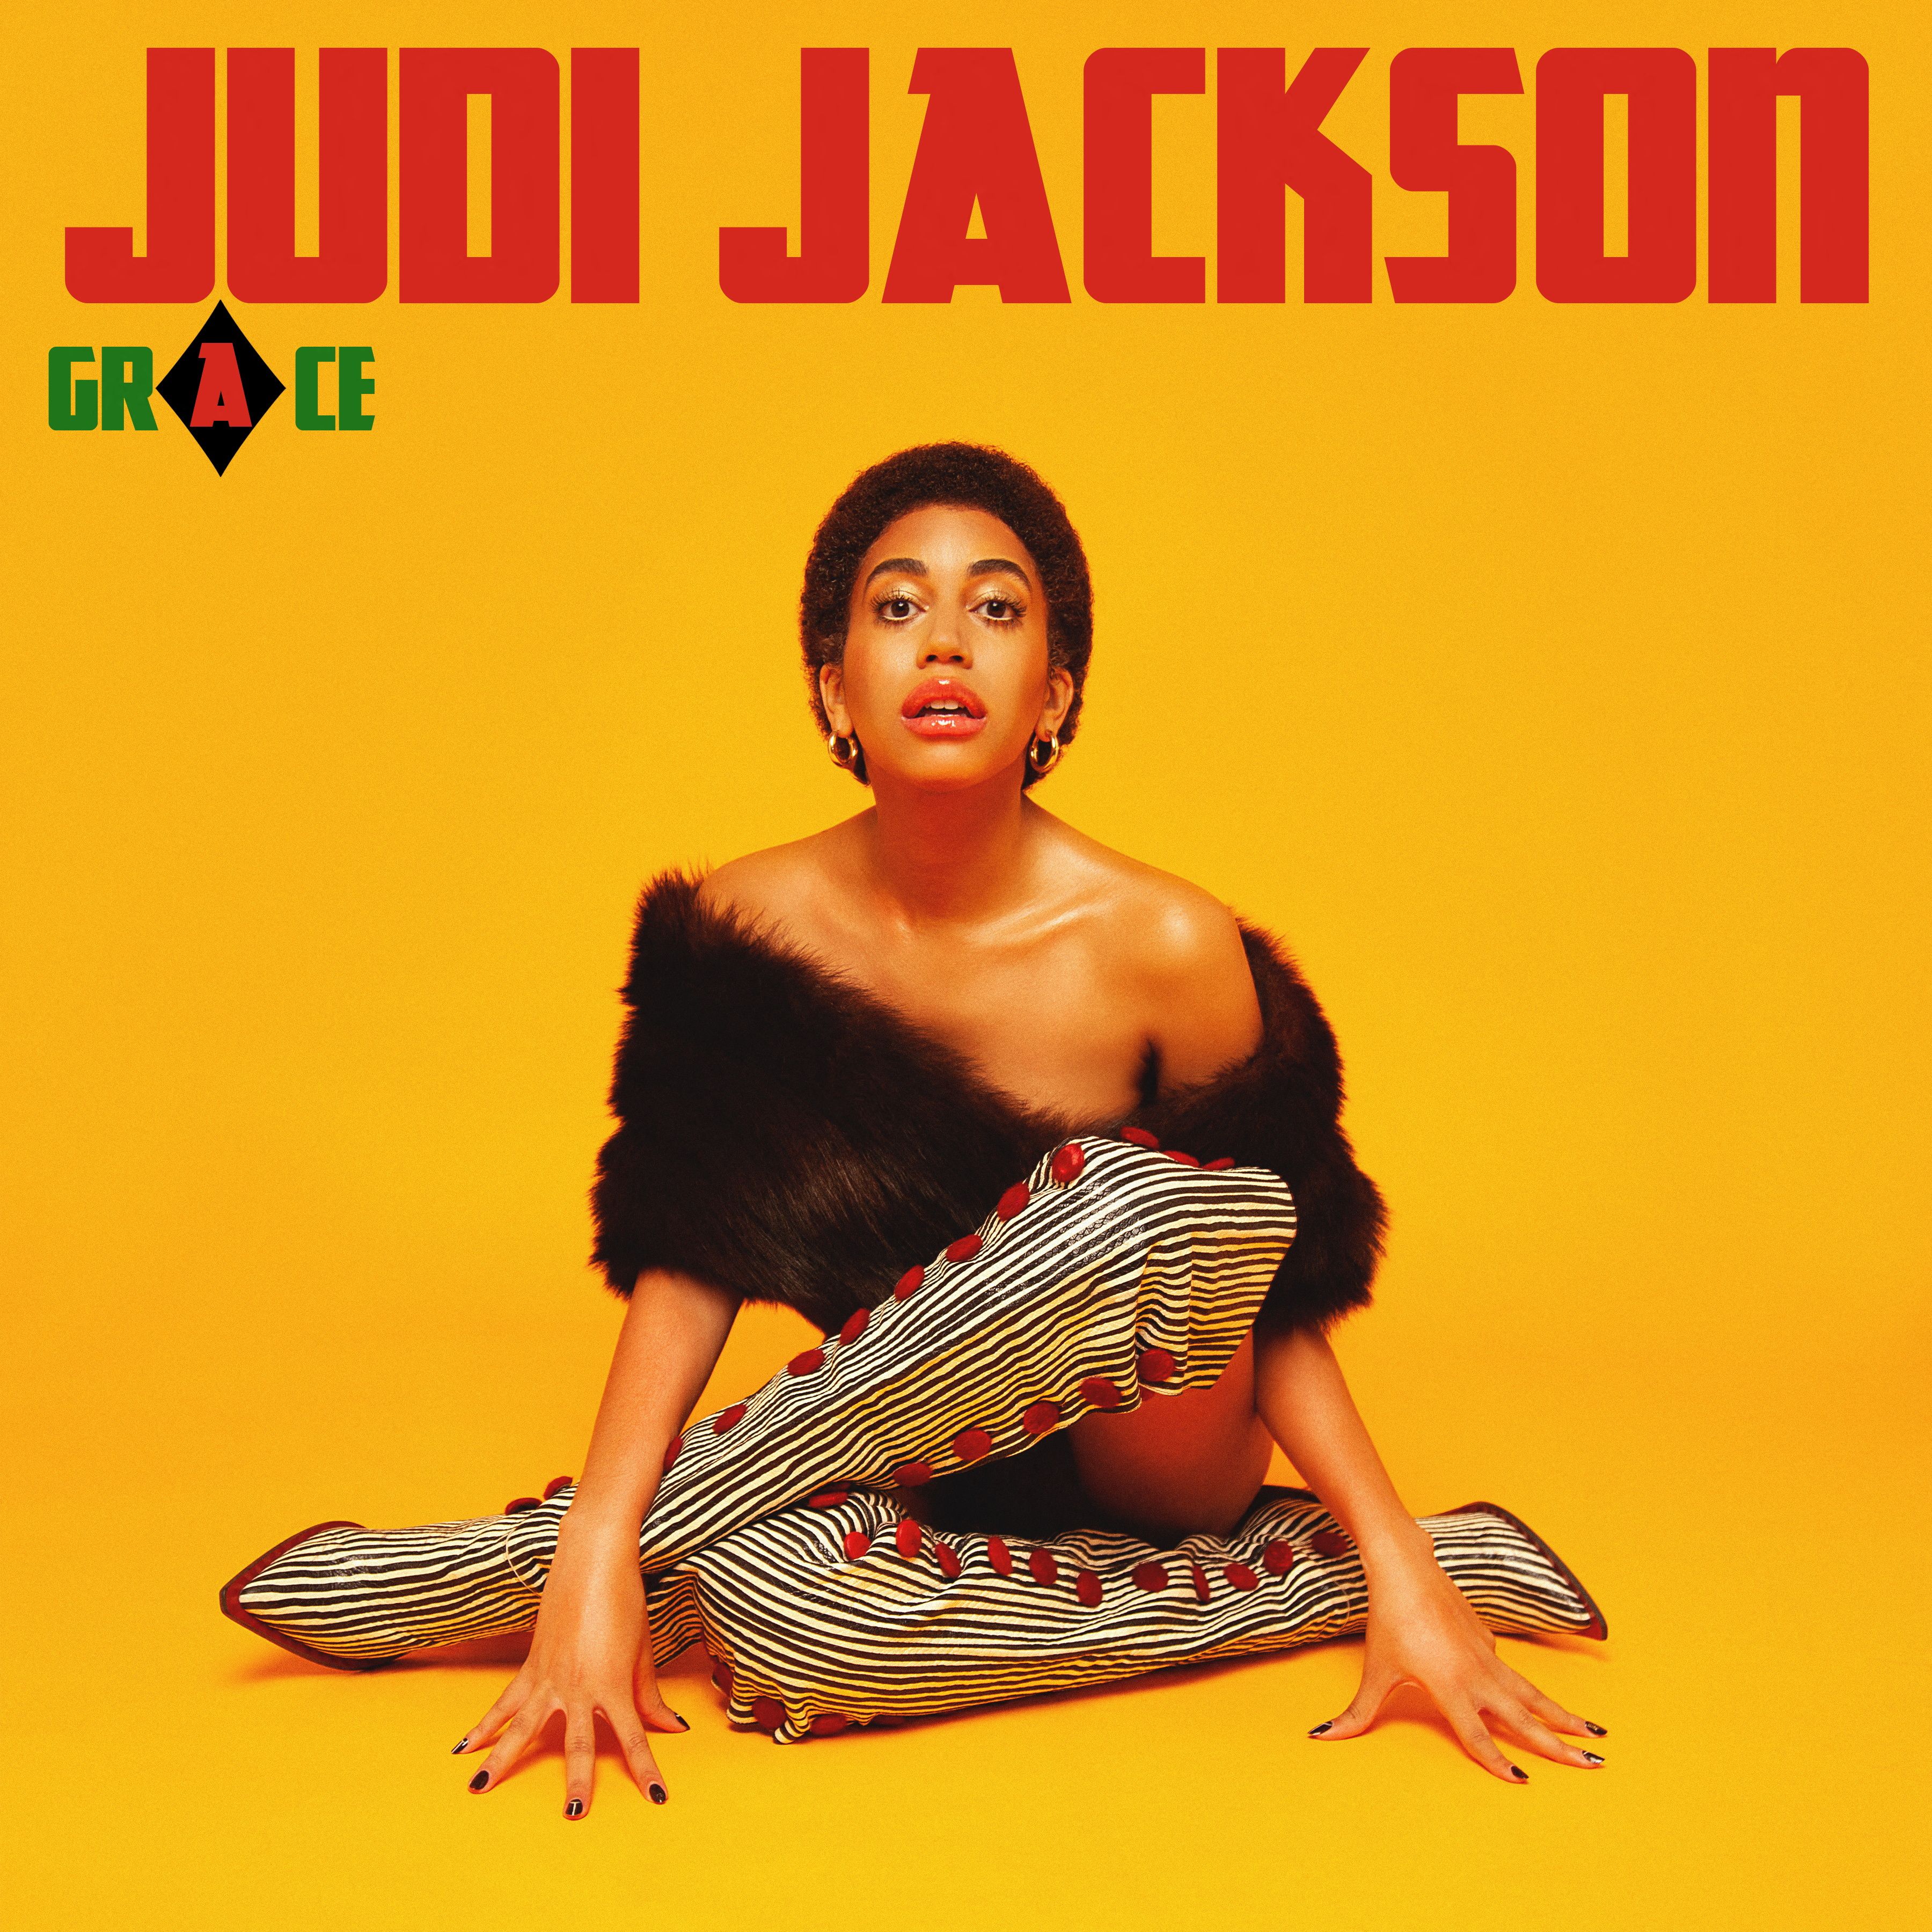 Judi Jackson uses music to bare her soul and let go